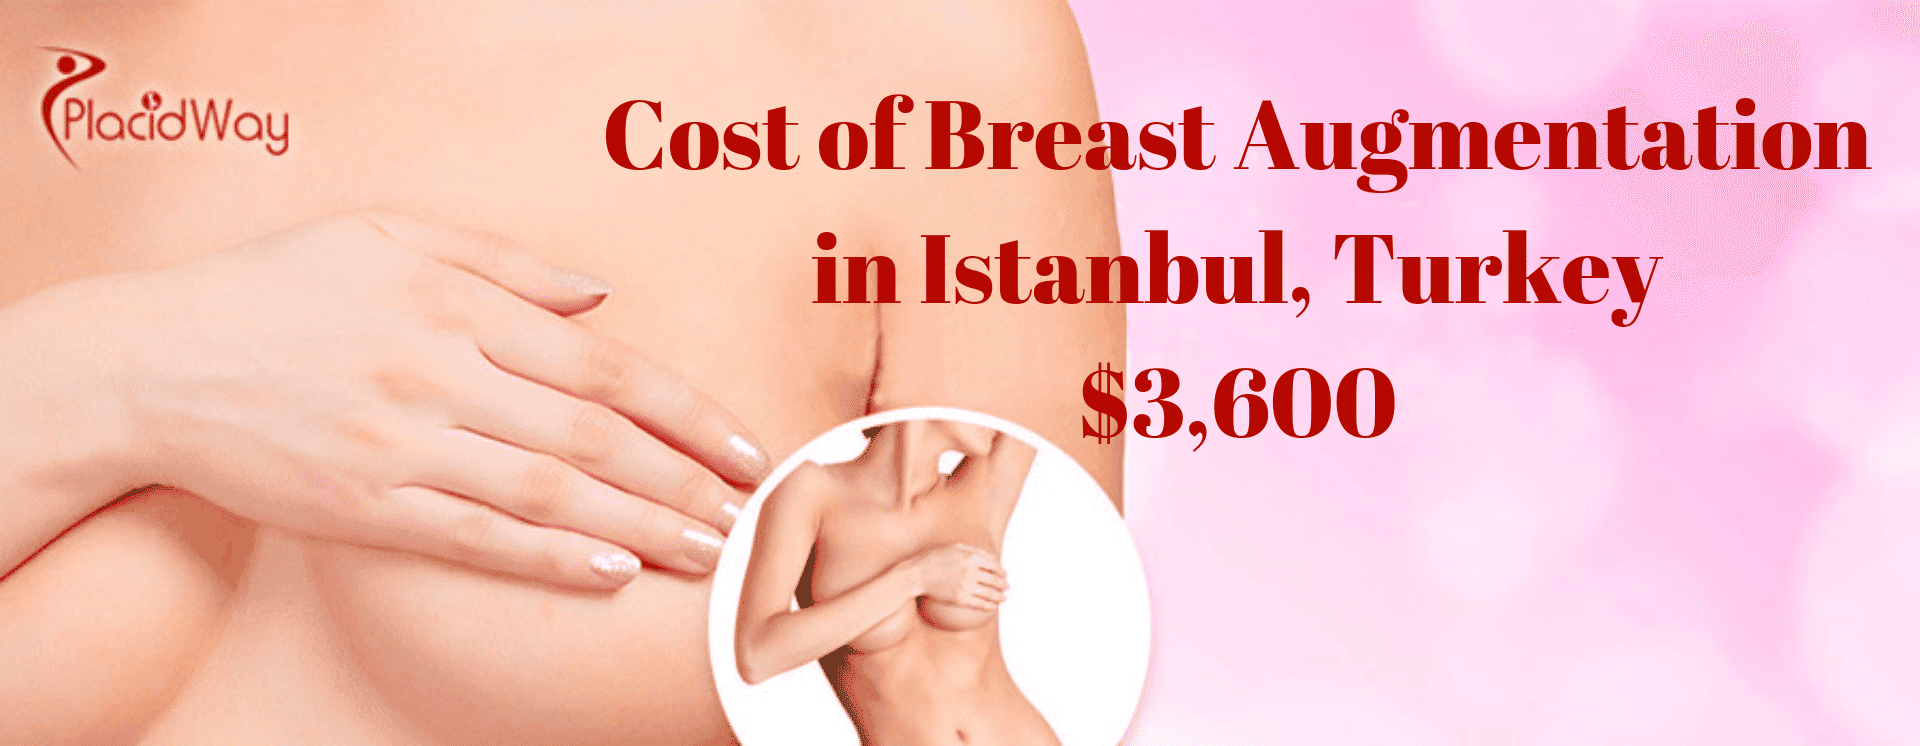 Cost of Breast Augmentation in Istanbul, Turkey